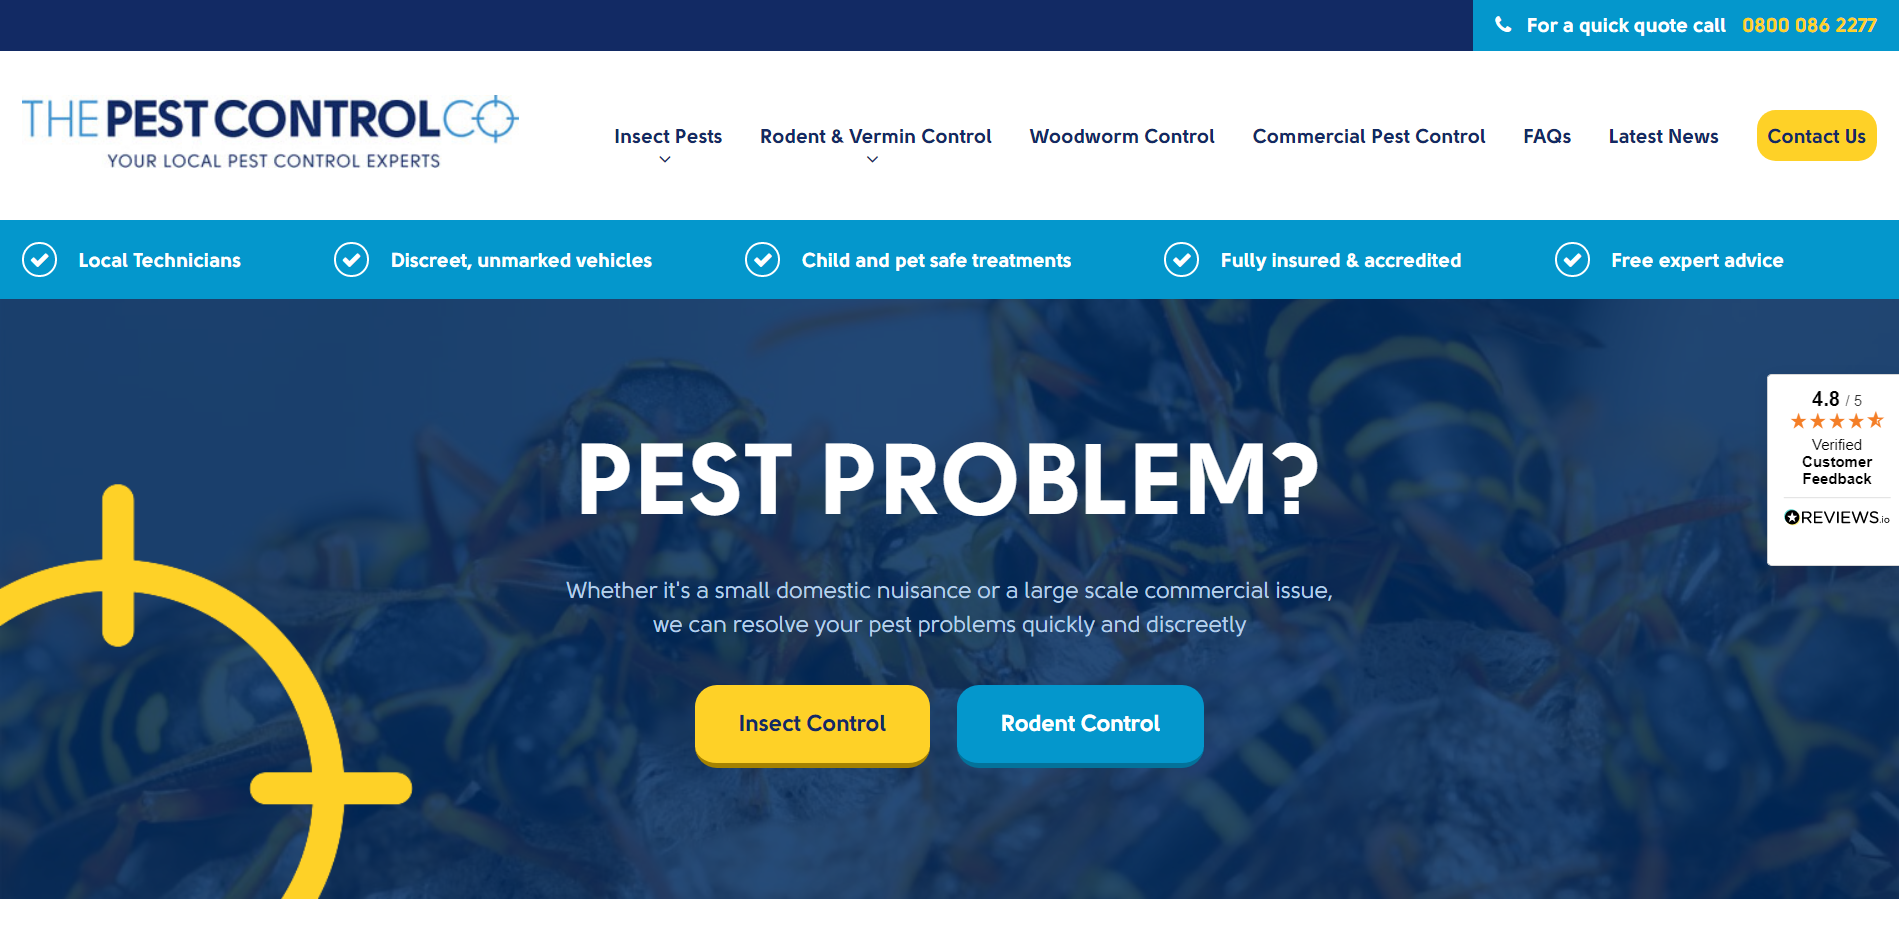 The Pest Control Co